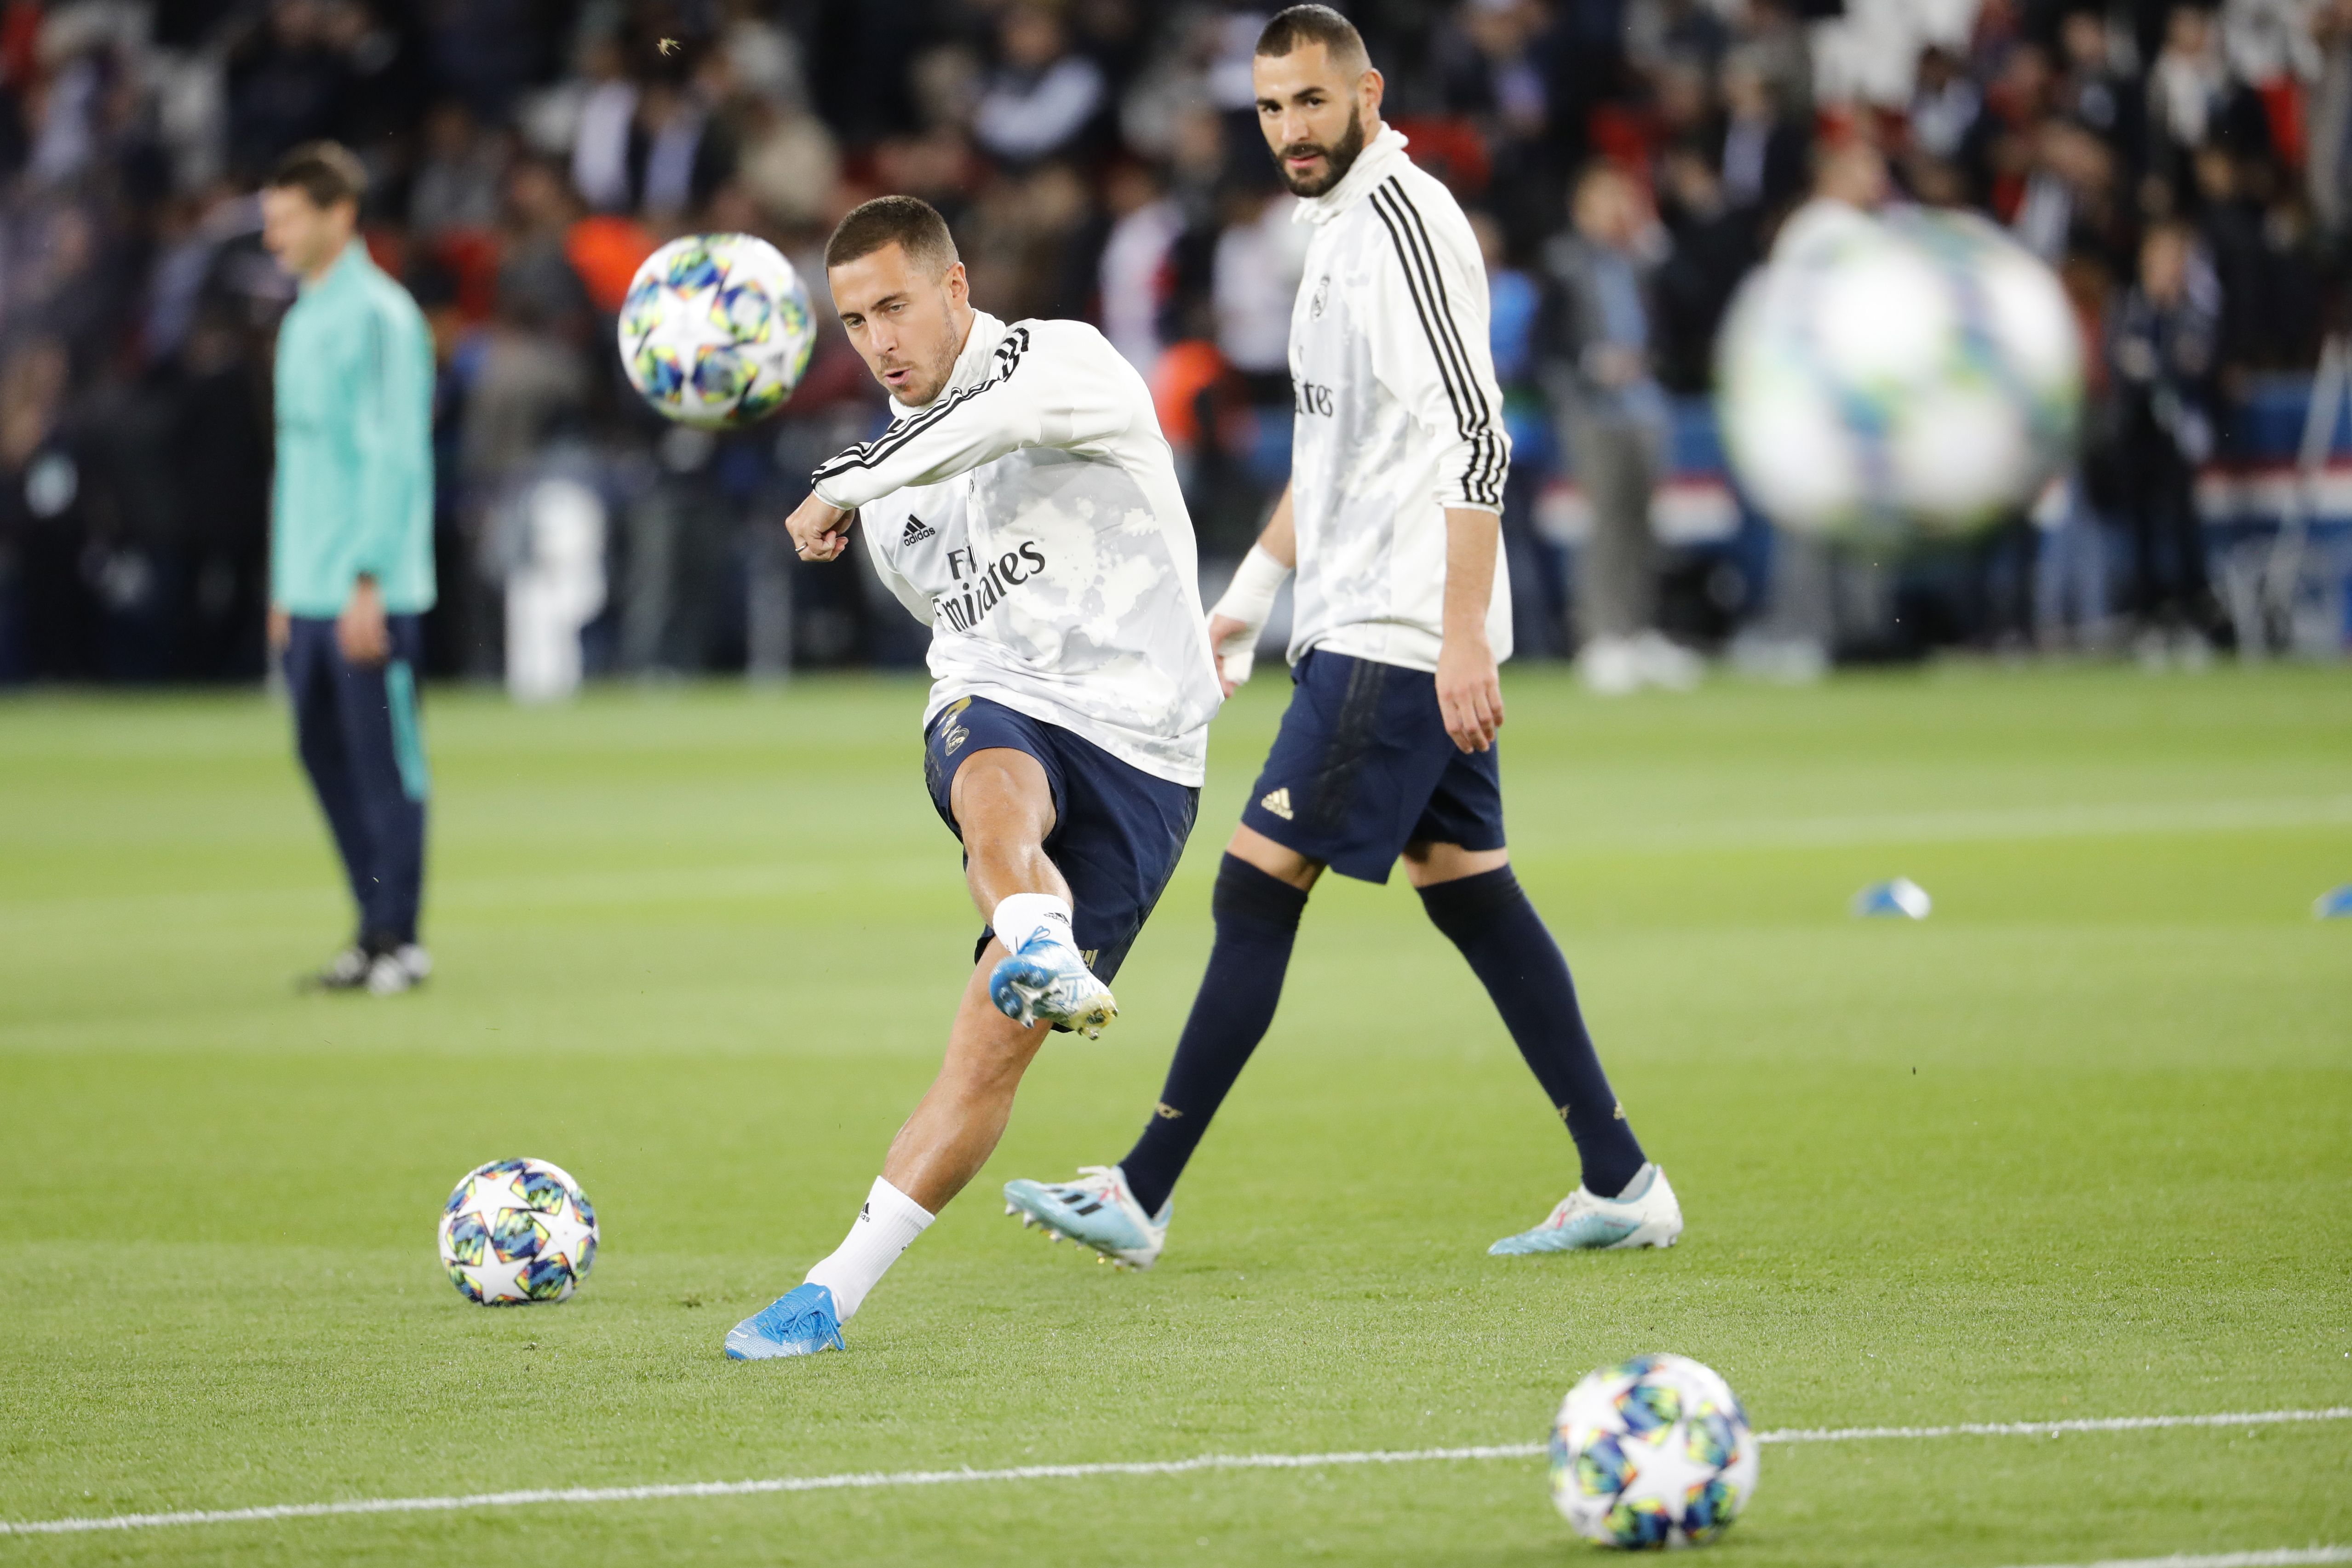 Real Madrid's Belgian forward Eden Hazard controls the ball next to Real Madrid's French forward Karim Benzema during the warm up session prior to the UEFA Champions league Group A football match between Paris Saint-Germain and Real Madrid, at the Parc des Princes stadium, in Paris, on September 18, 2019. (Photo by Thomas SAMSON / AFP)        (Photo credit should read THOMAS SAMSON/AFP/Getty Images)